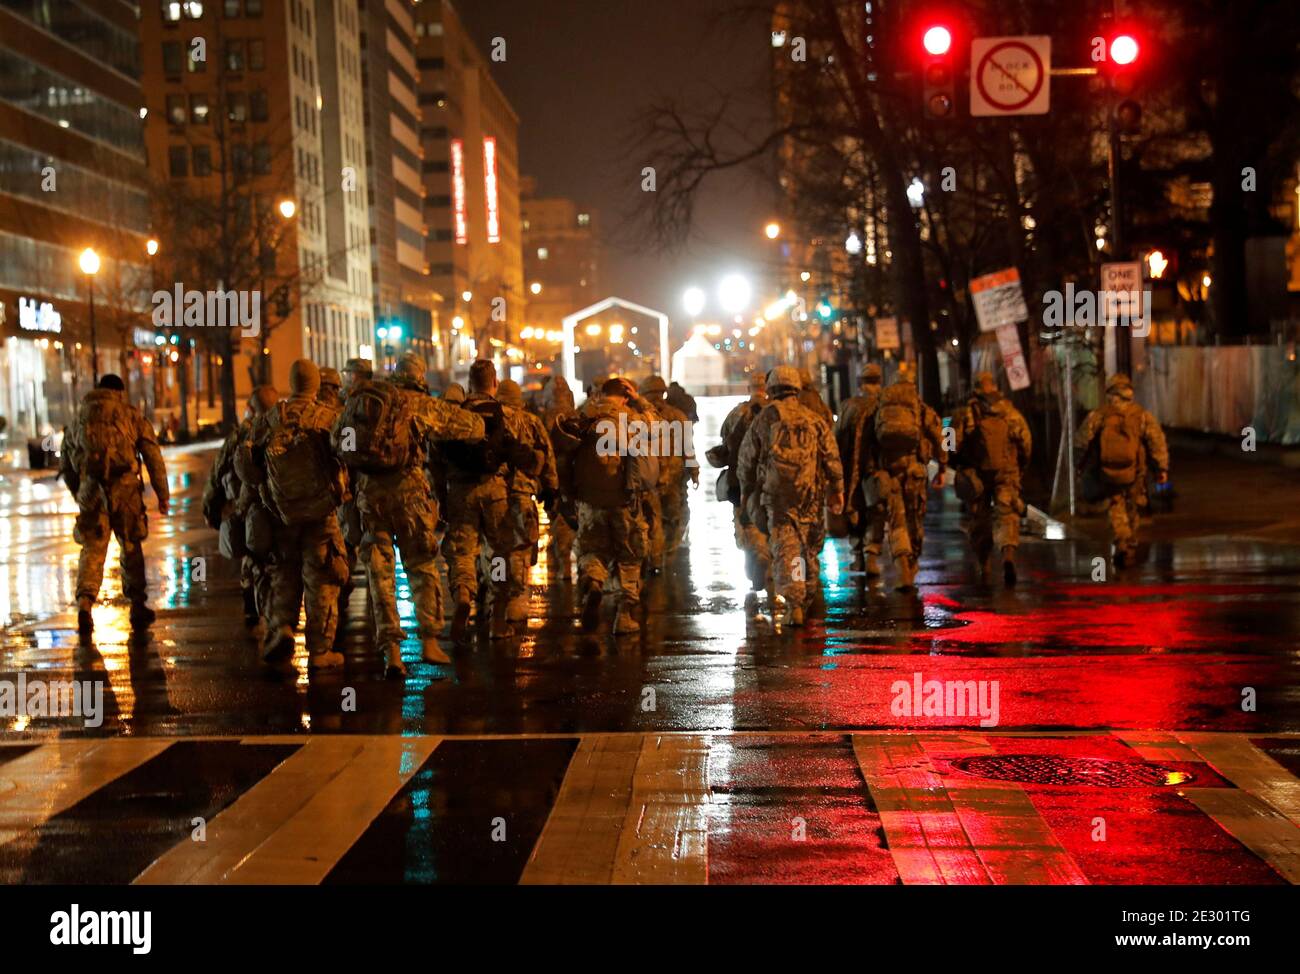 U.S. National Guard soldiers patrol empty streets inside the ?Green Zone? security cordon near the White House ahead of the upcoming presidential inauguration in Washington, U.S. January 15, 2021. REUTERS/Jim Bourg Stock Photo